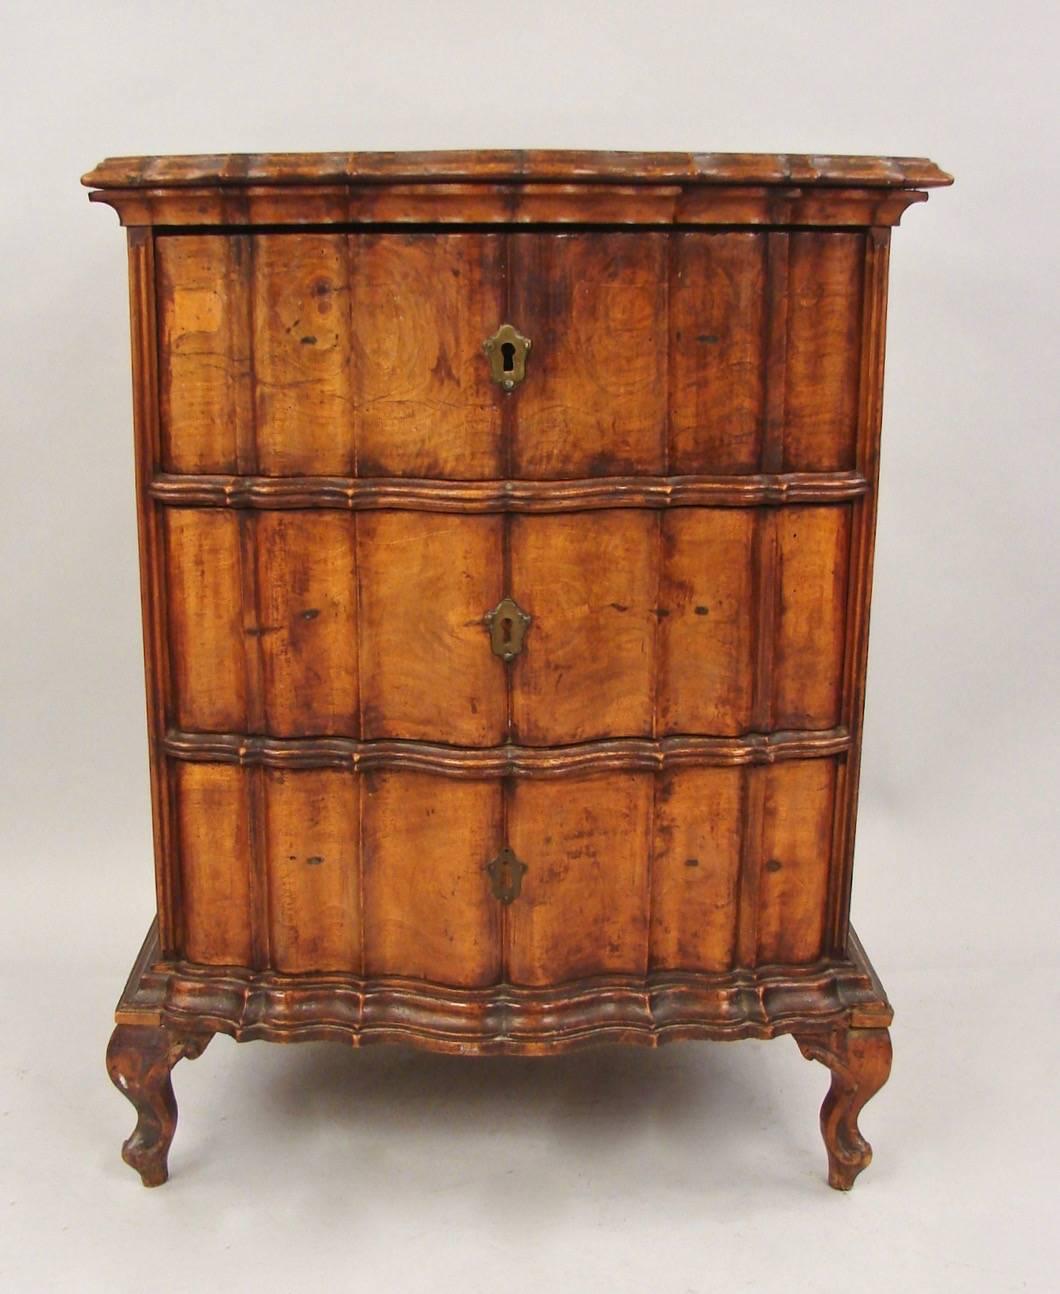 An Italian walnut neoclassical commodino with a single drawer and a side cabinet door, the top and front of shaped wavy form, supported on short cabriole legs. Attractive old color and patina, circa 1790-1800.